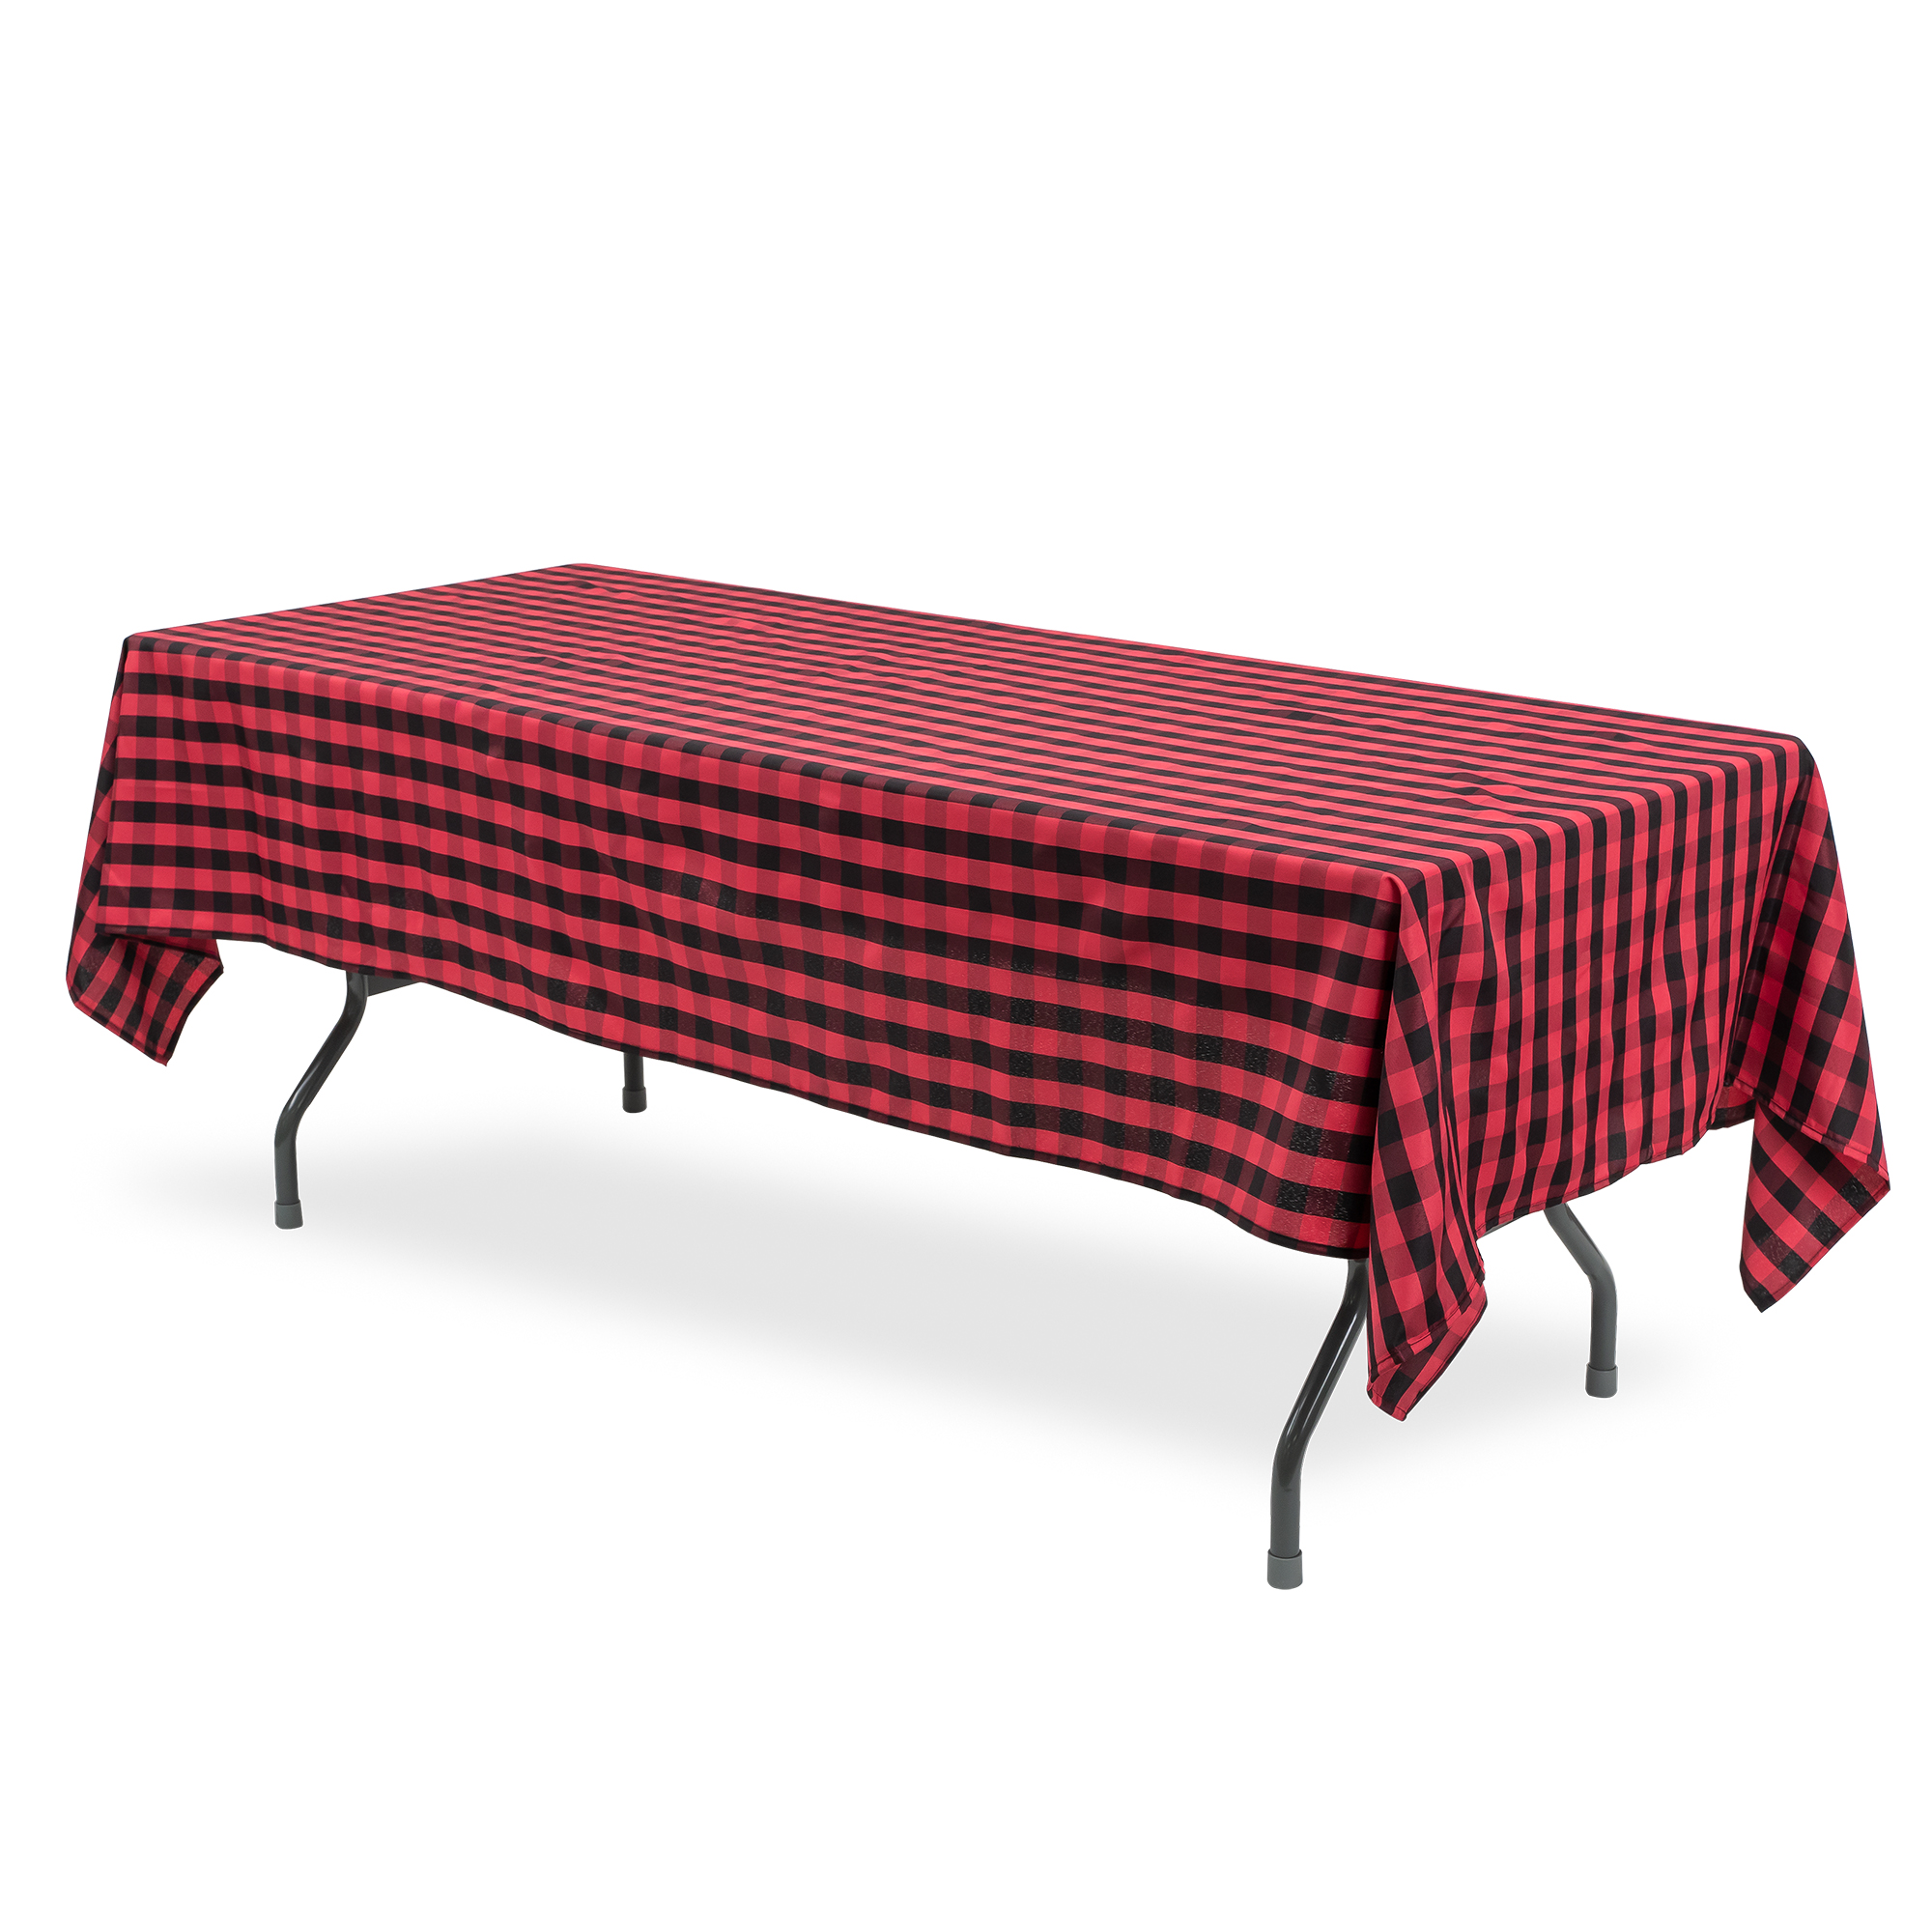 Buffalo Plaid Rectangle Polyester Table Cover 60" x 102" - Red & Black